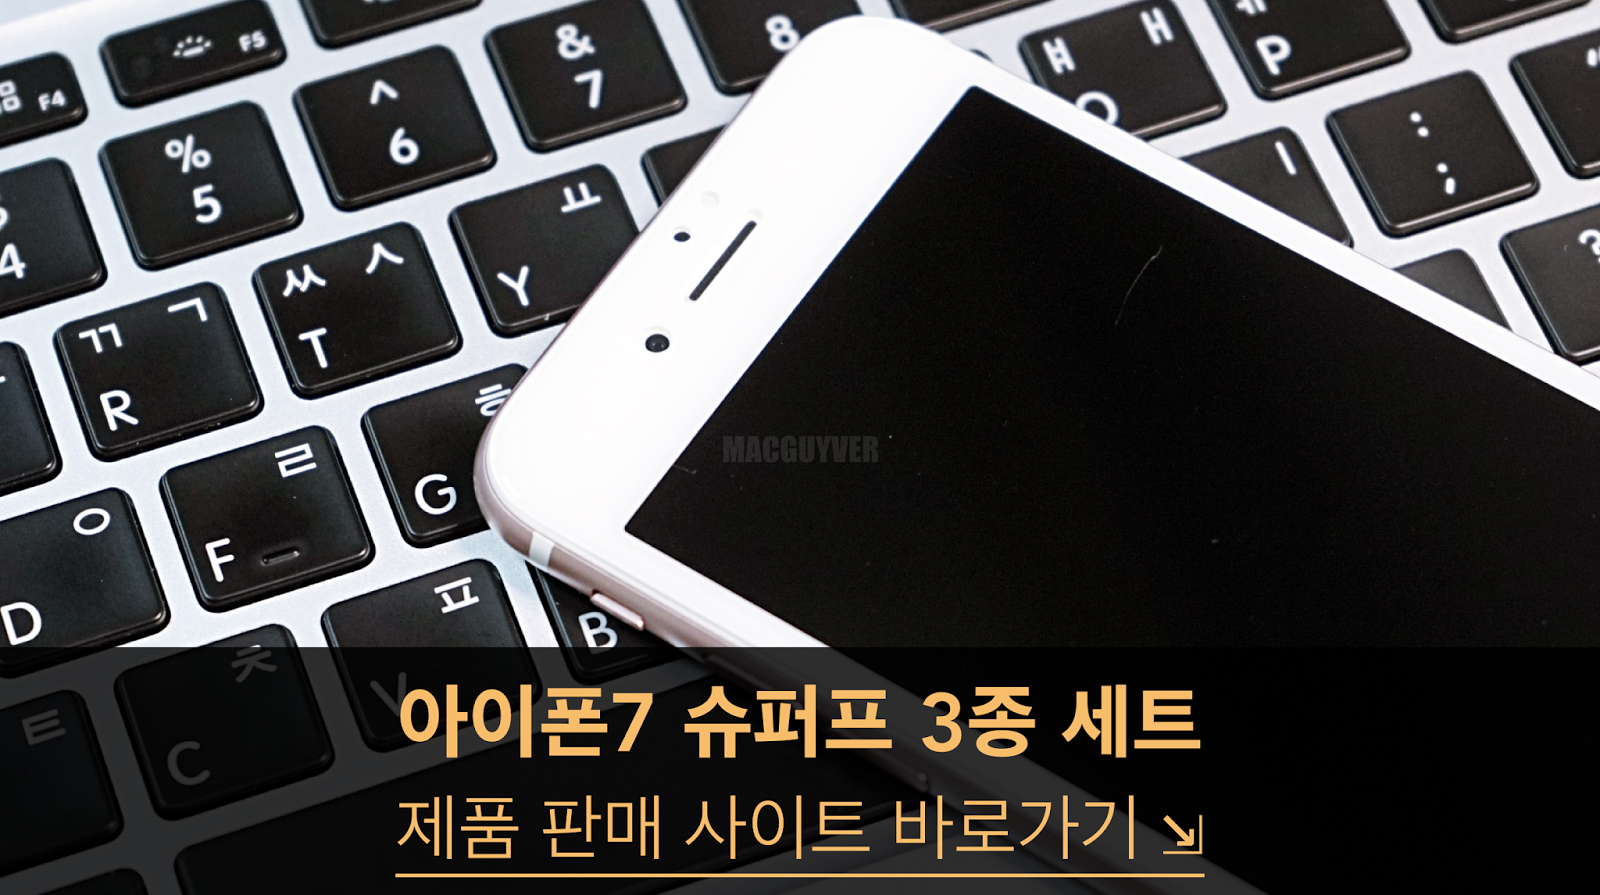 http://www.superf.co.kr/product/detail.html?product_no=99&cate_no=68&display_group=1